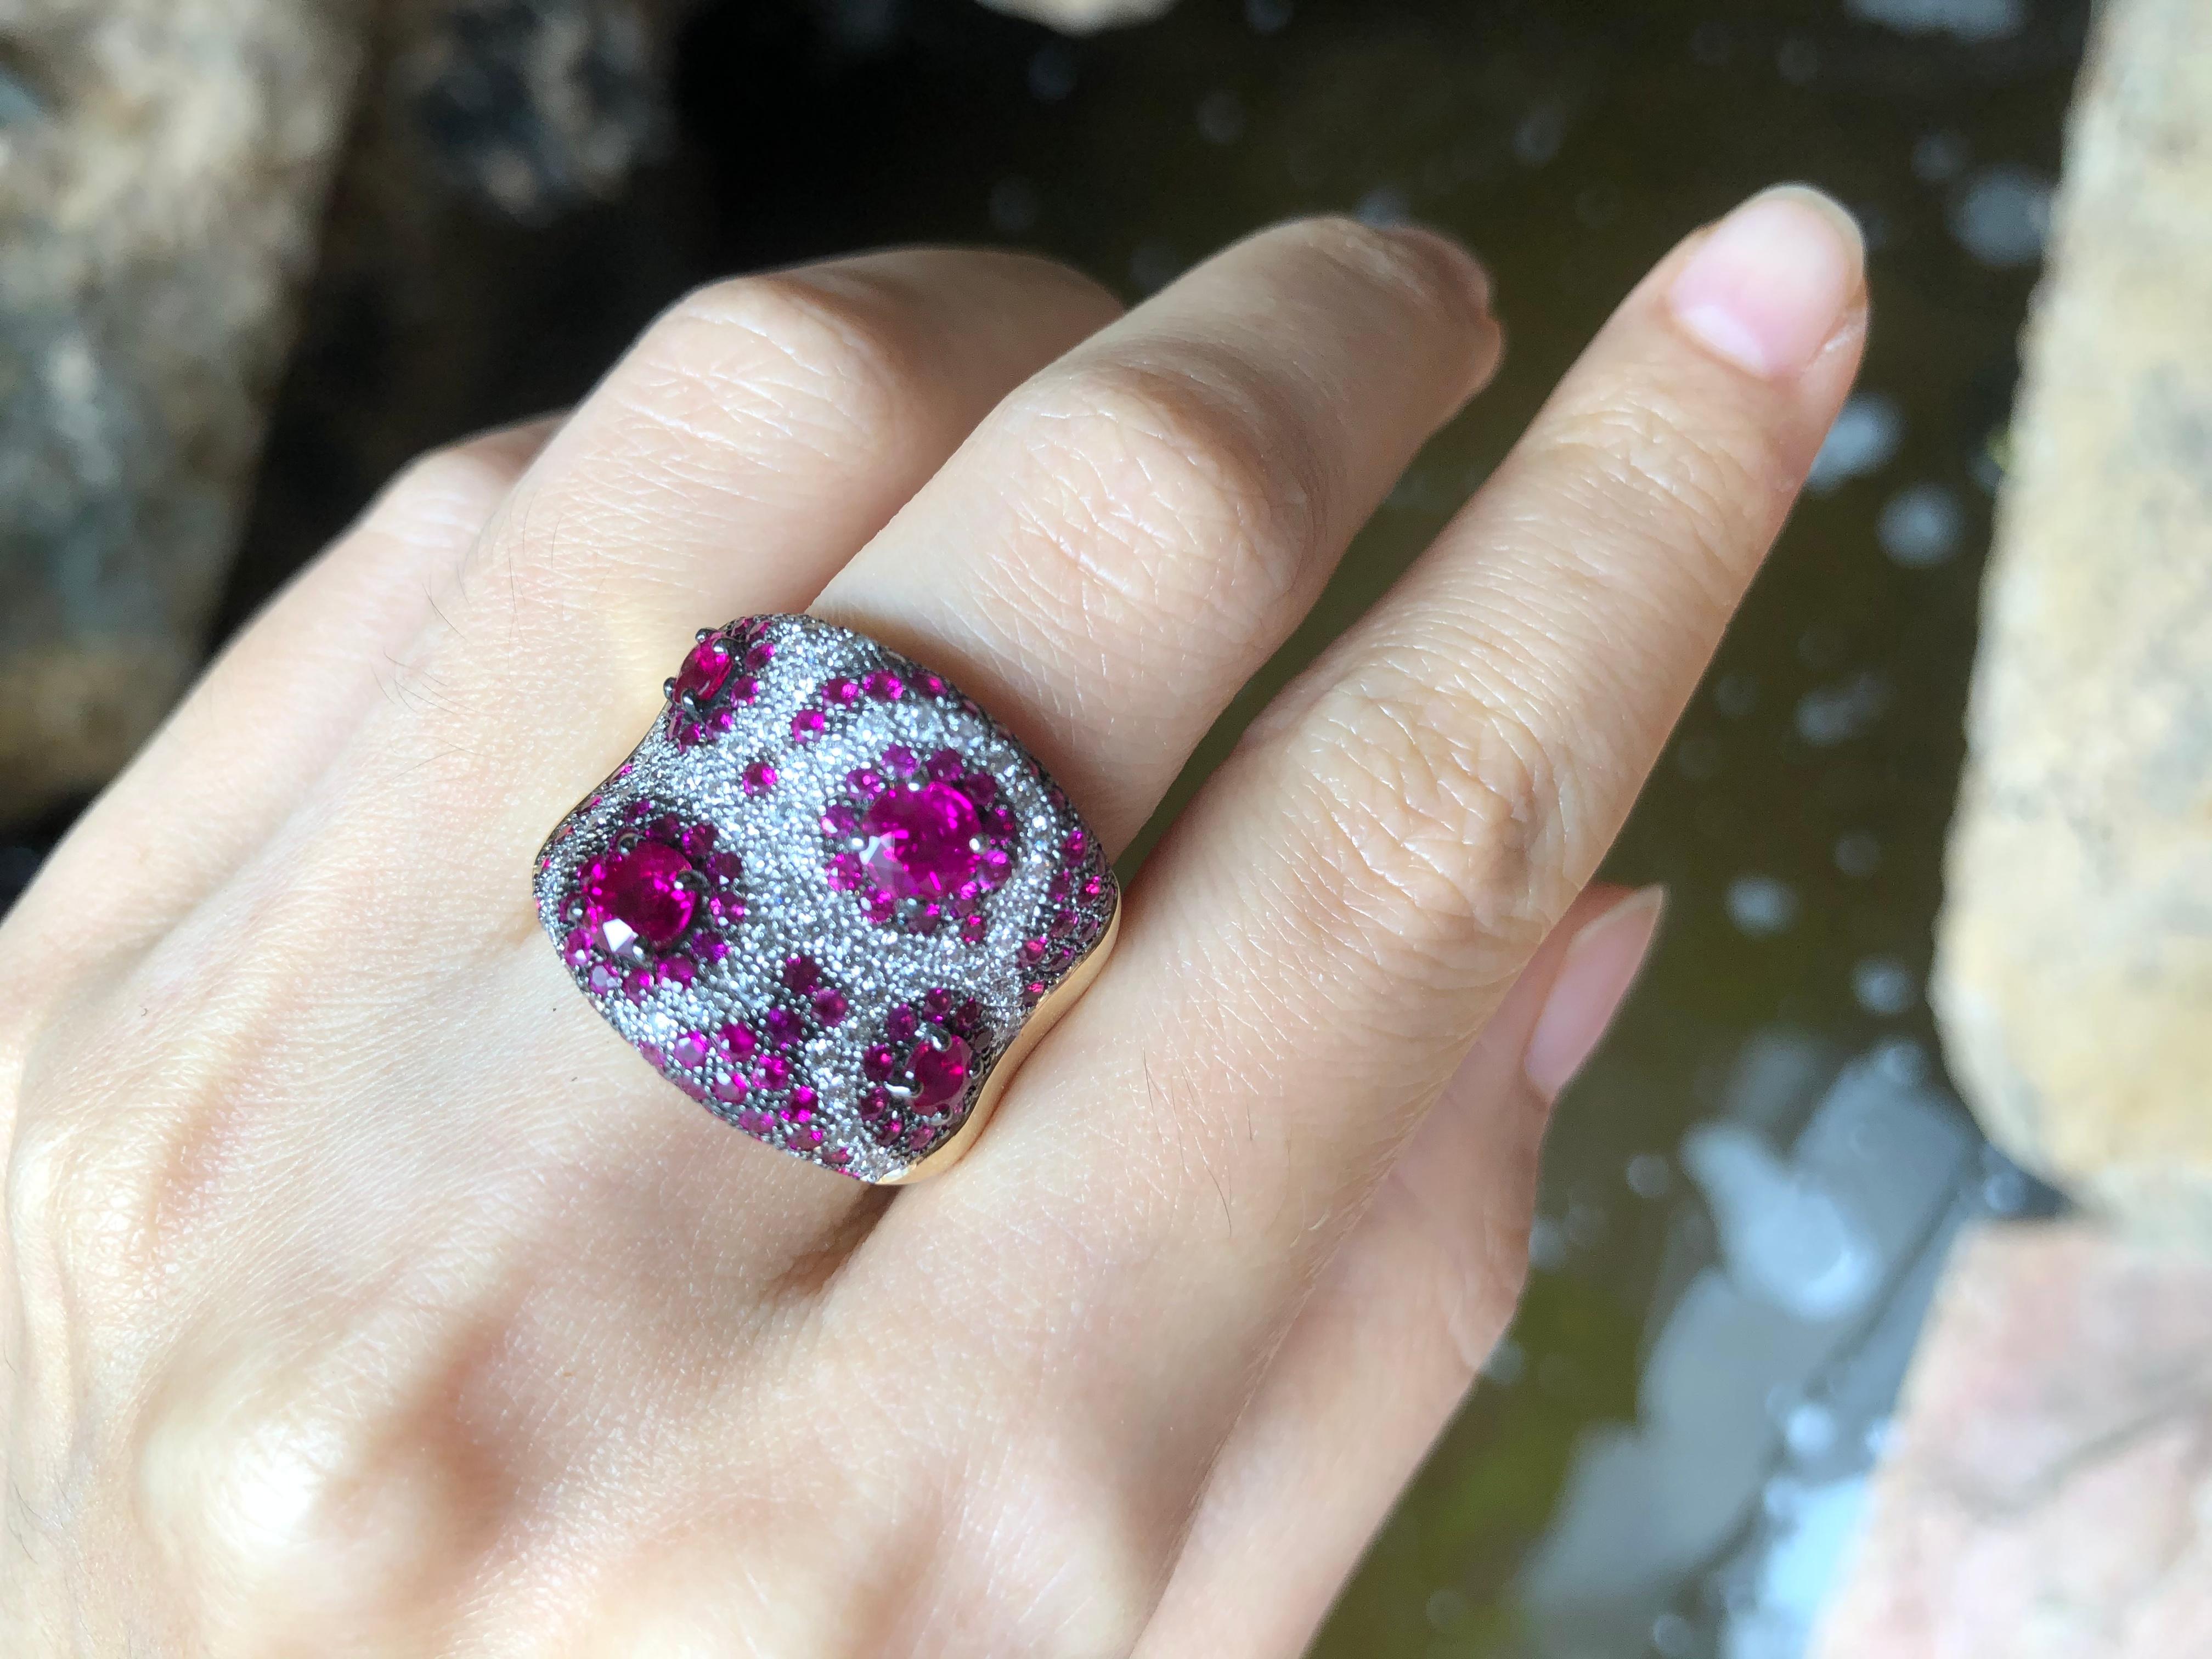 Pink Sapphire 3.45 carats with Diamond 0.50 carat Ring set in 18 Karat Rose Gold Settings

Width:  2.9 cm 
Length: 2.0 cm
Ring Size: 54
Total Weight: 18.68 grams

